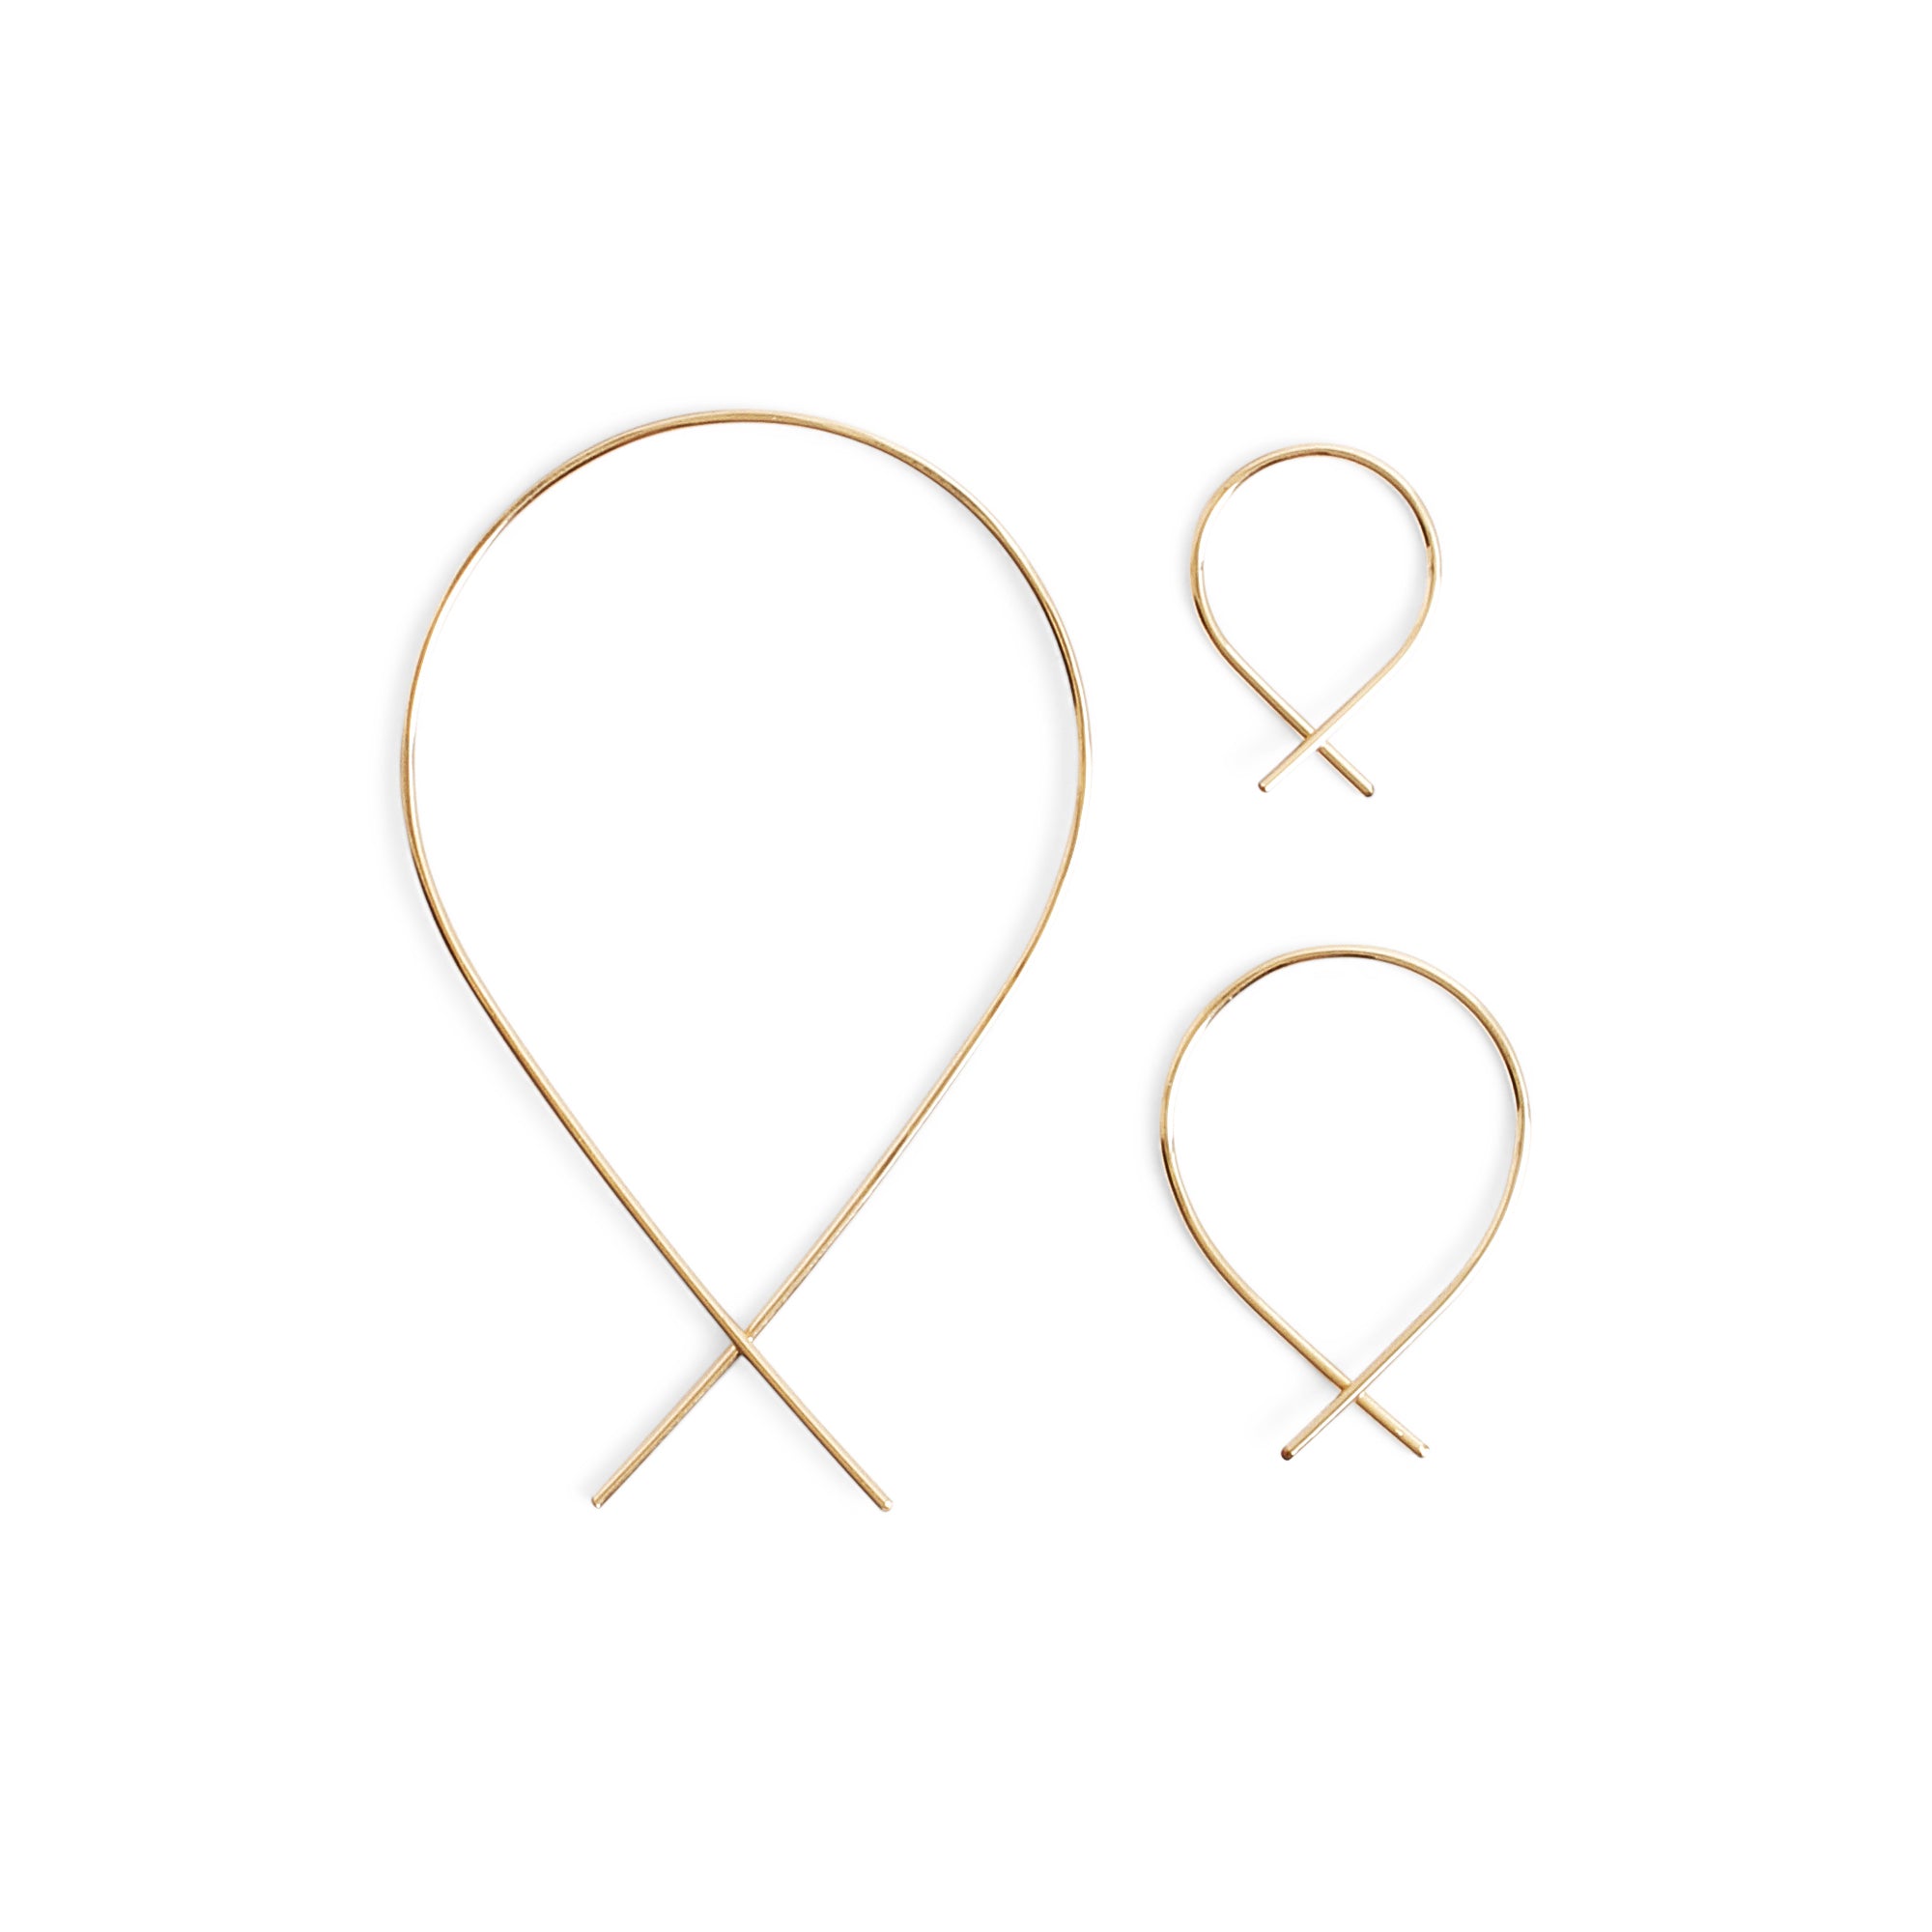 The Fish Earrings are delicate threader earrings feature 14K gold-fill or silver wire shaped into a continuous, open hoop 